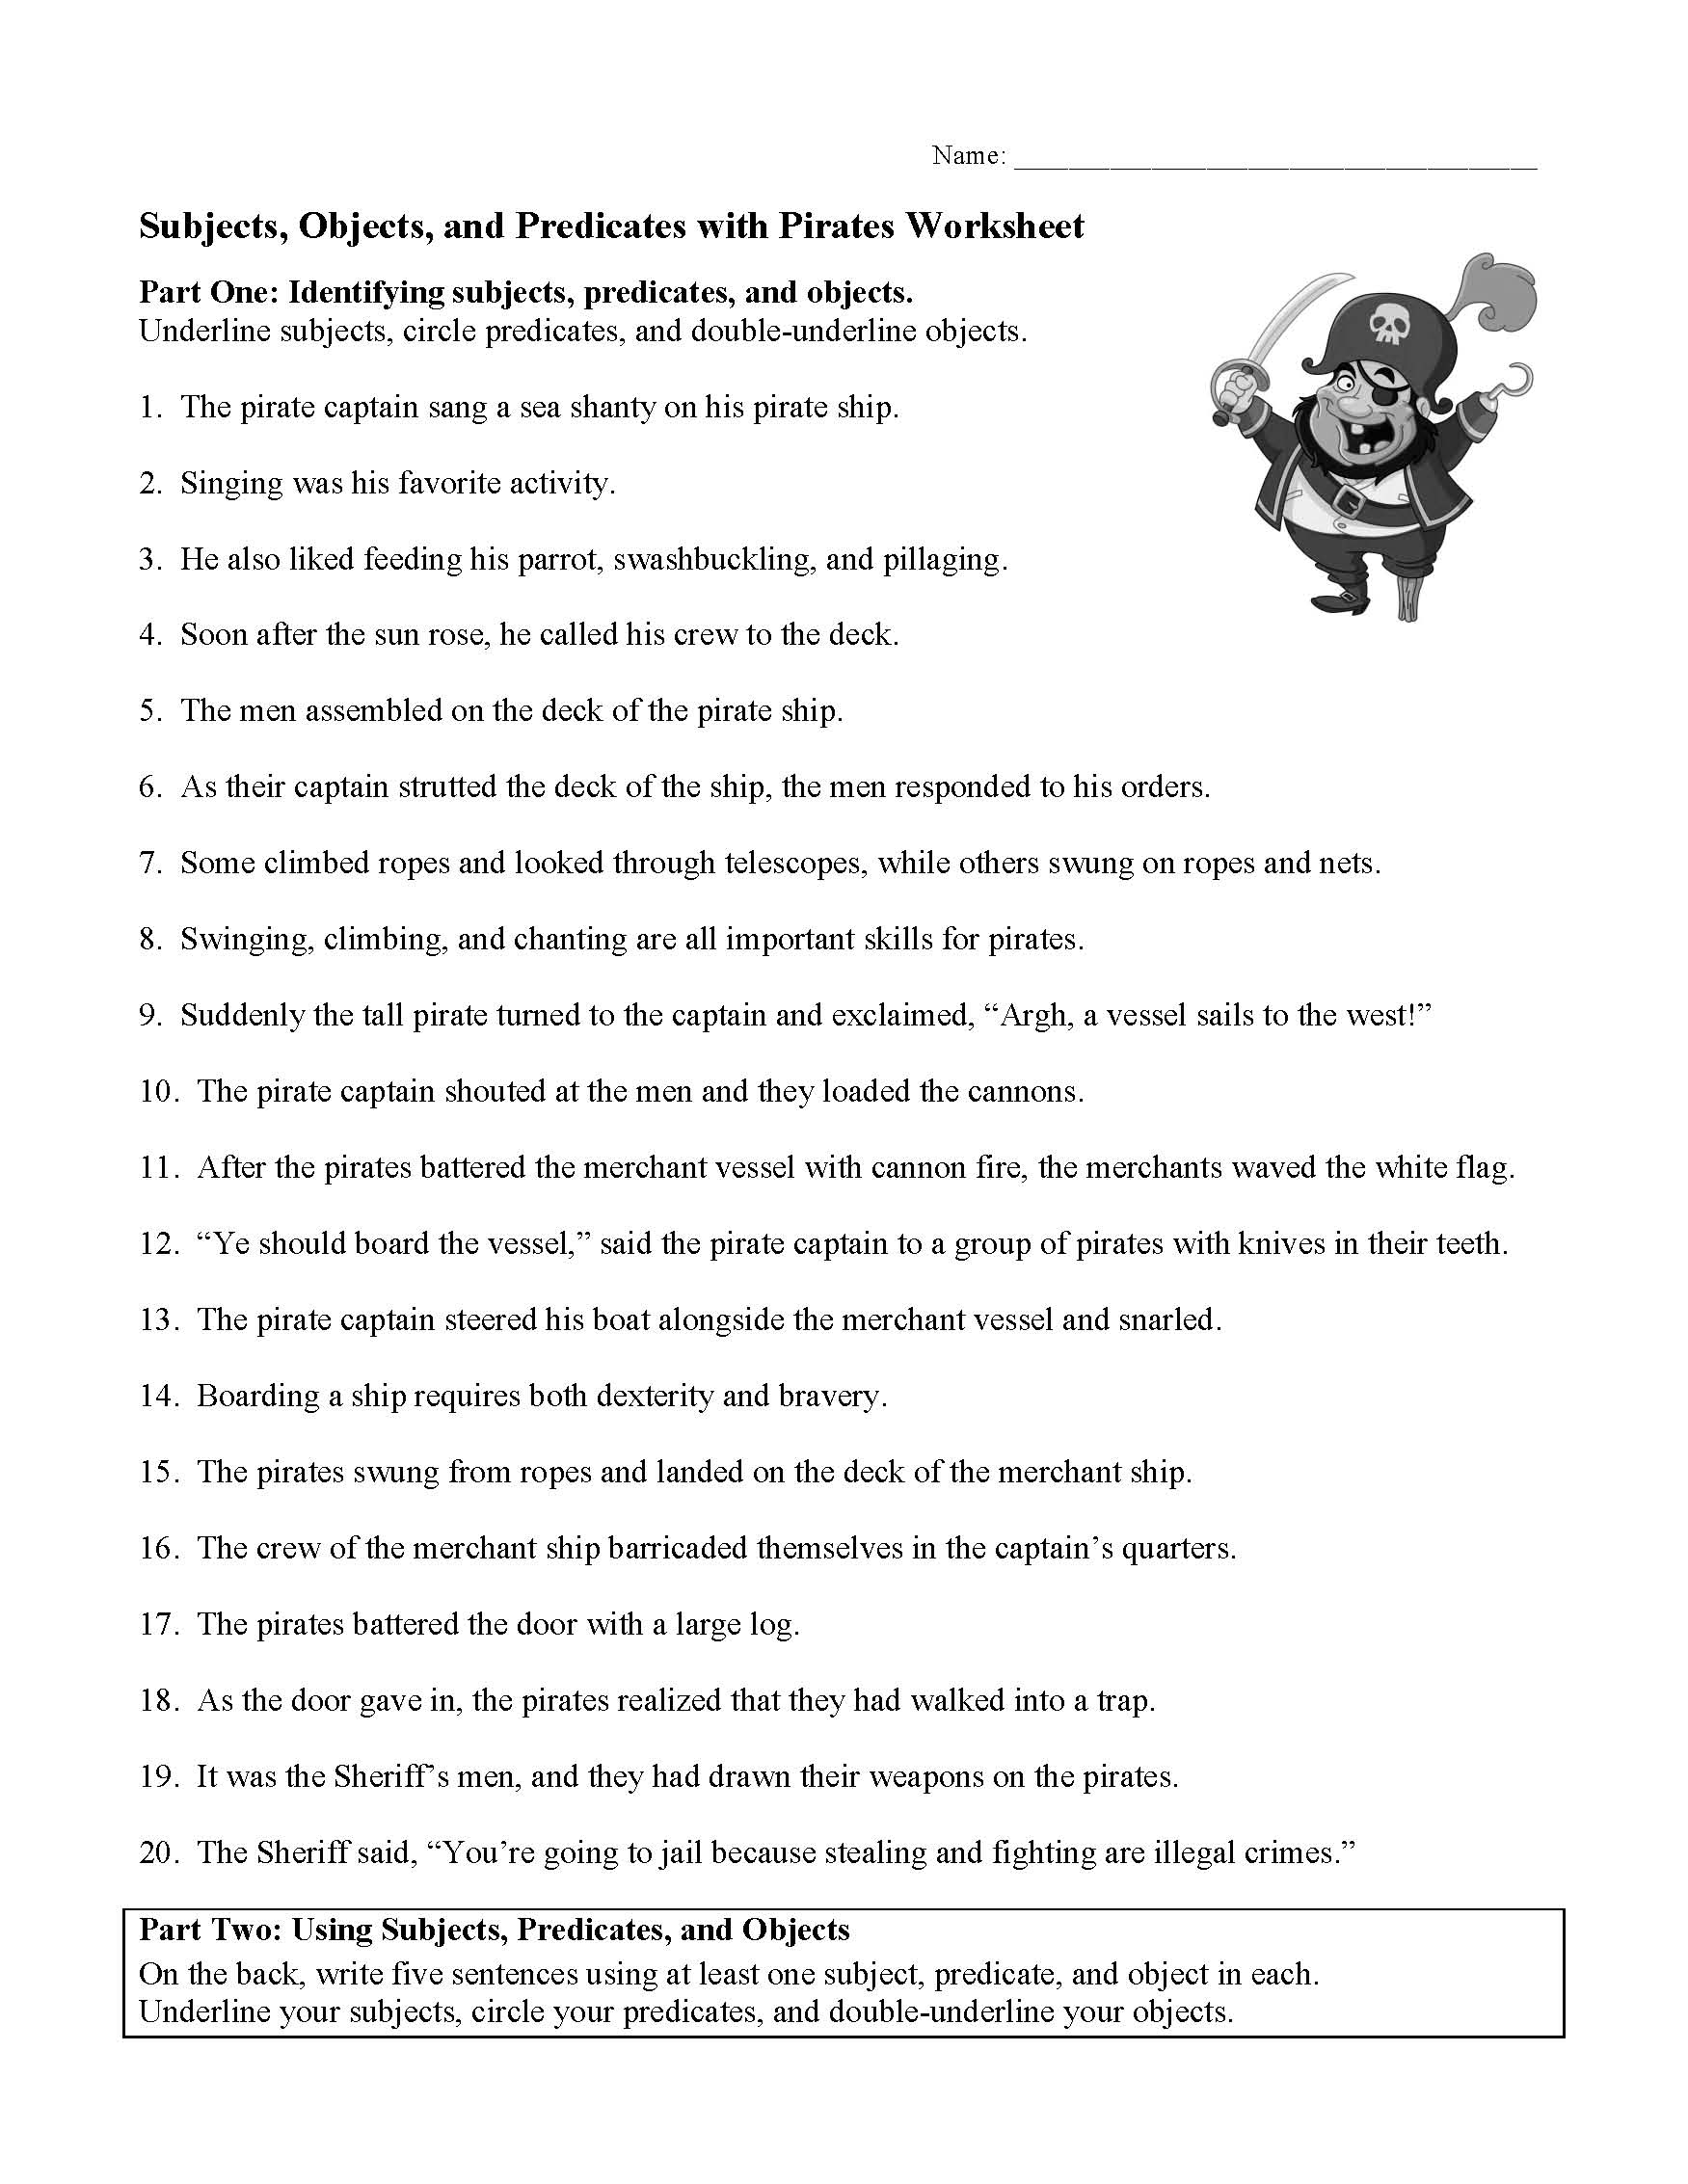 subject-and-predicate-worksheets-subject-and-predicate-complete-subject-and-predicate